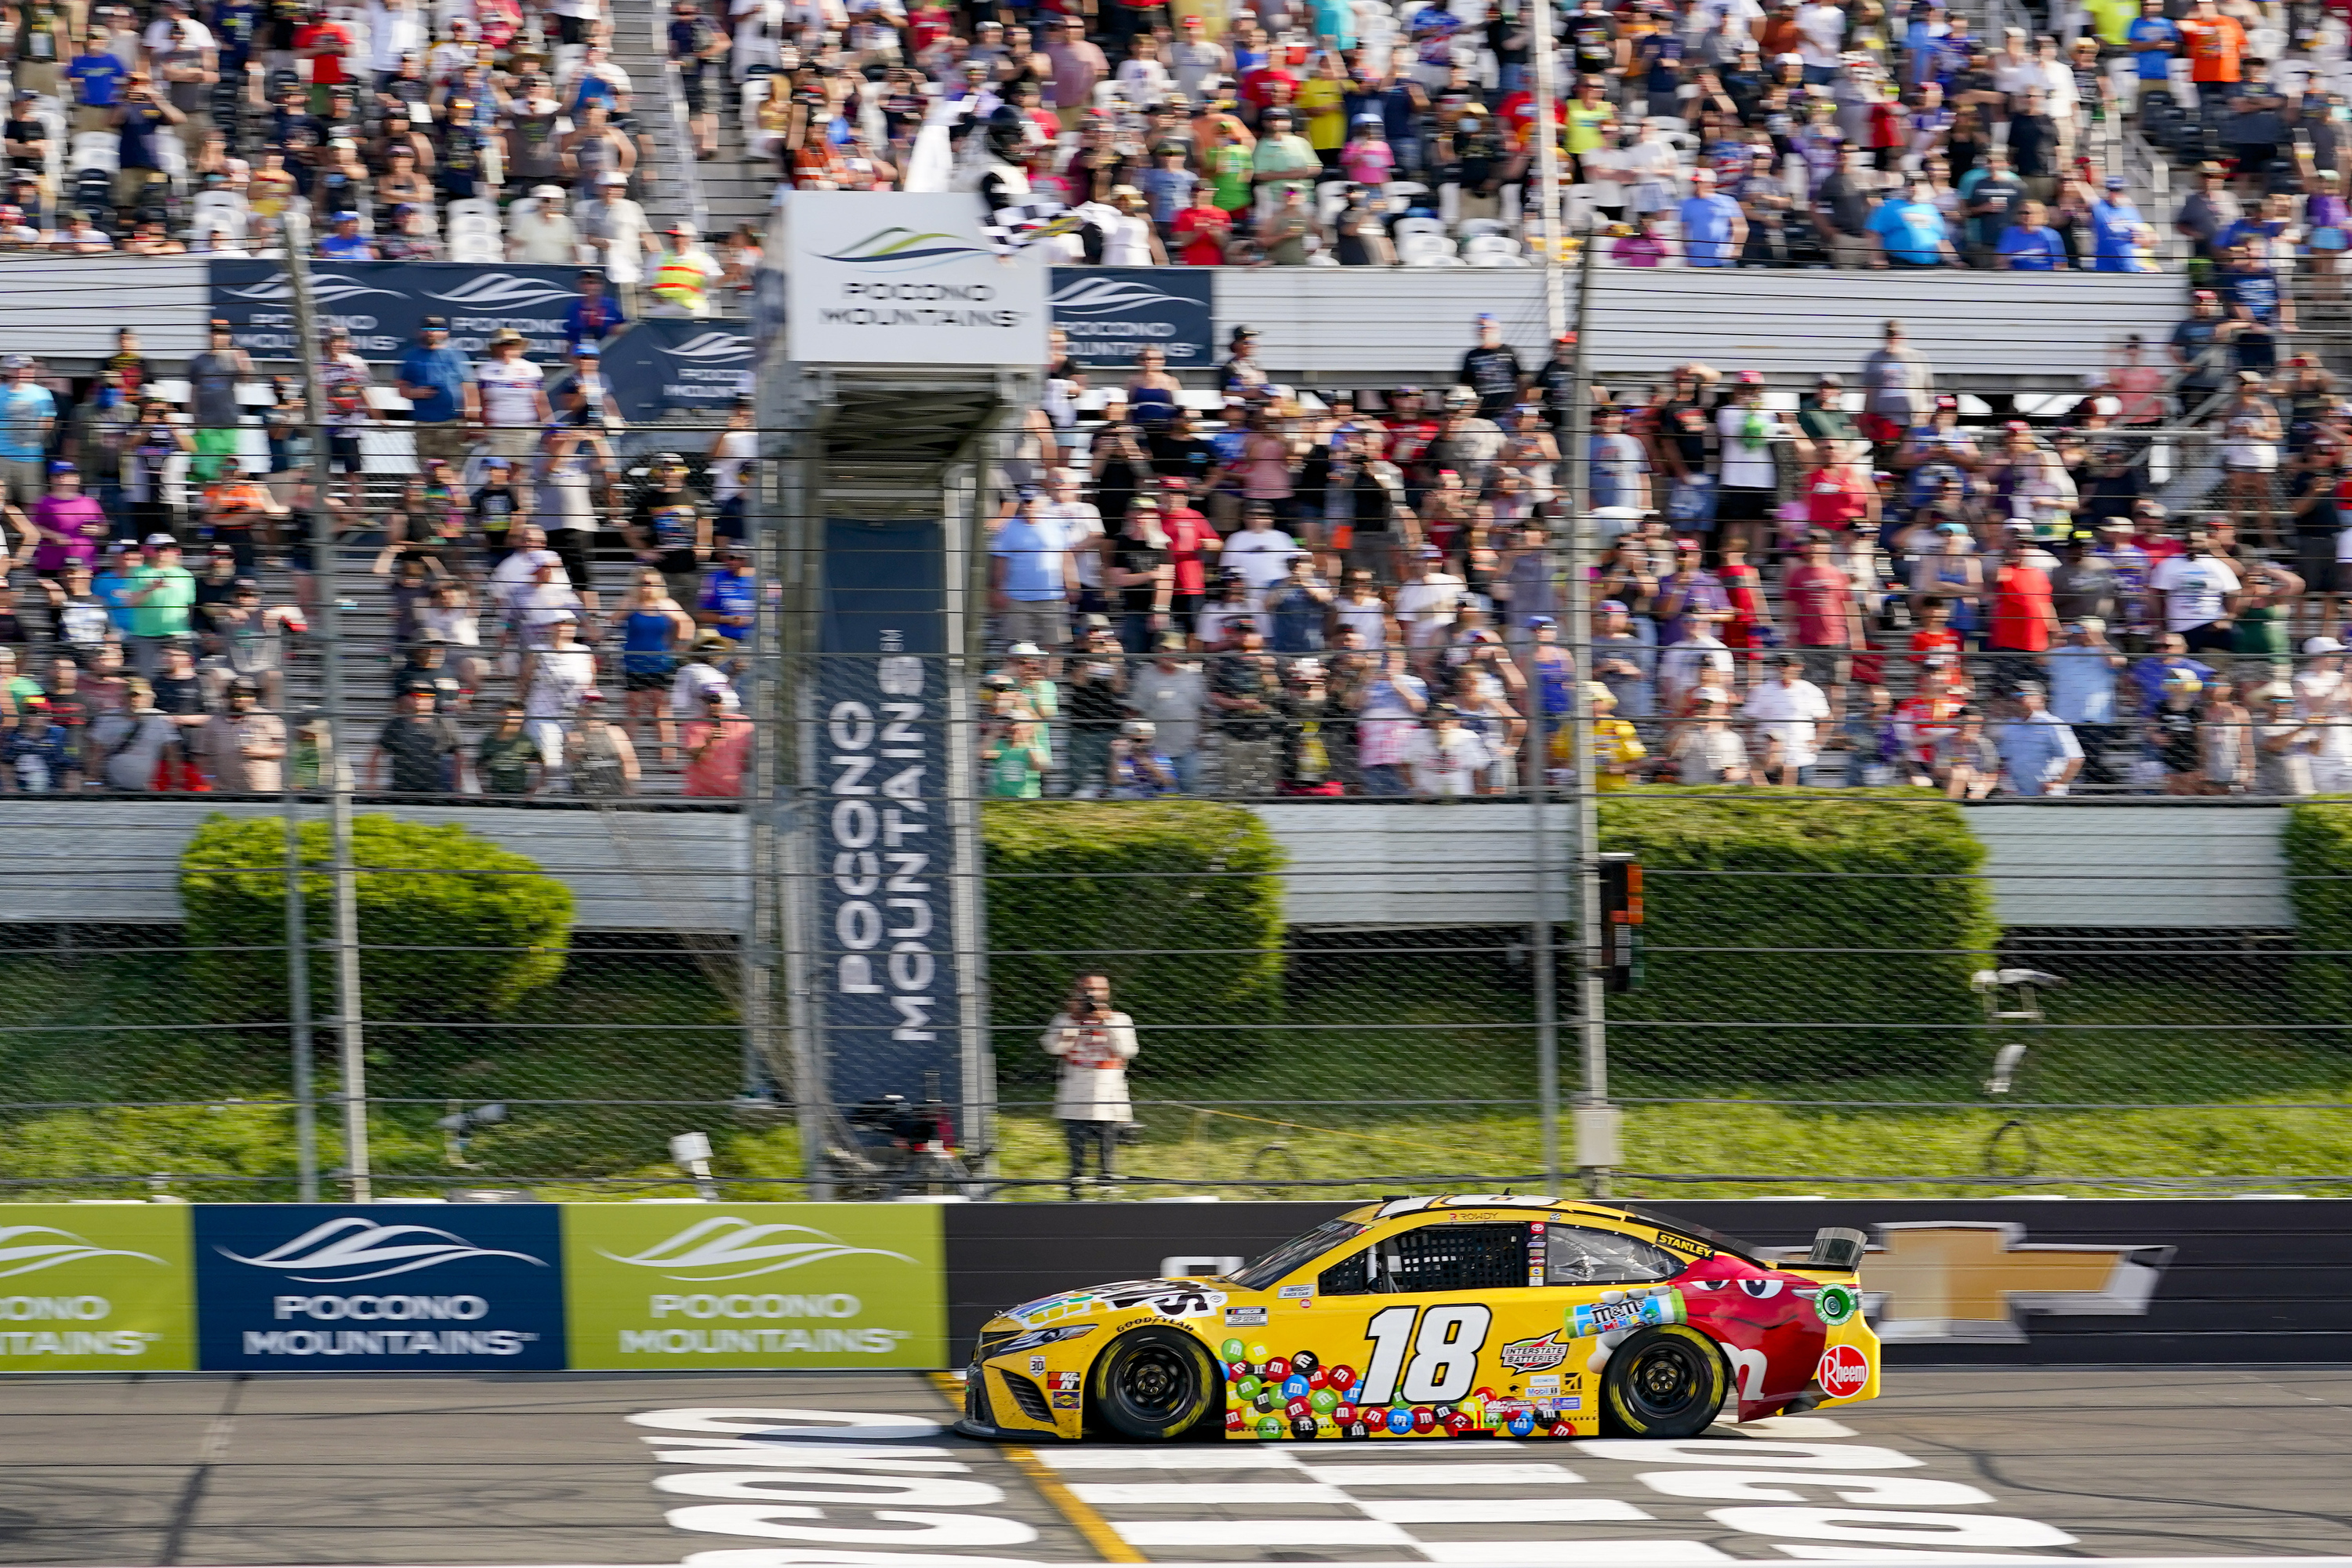 NASCAR at Pocono 2021 Results: Kyle Busch Gets 2nd Win of Season; Larson Finishes 2nd